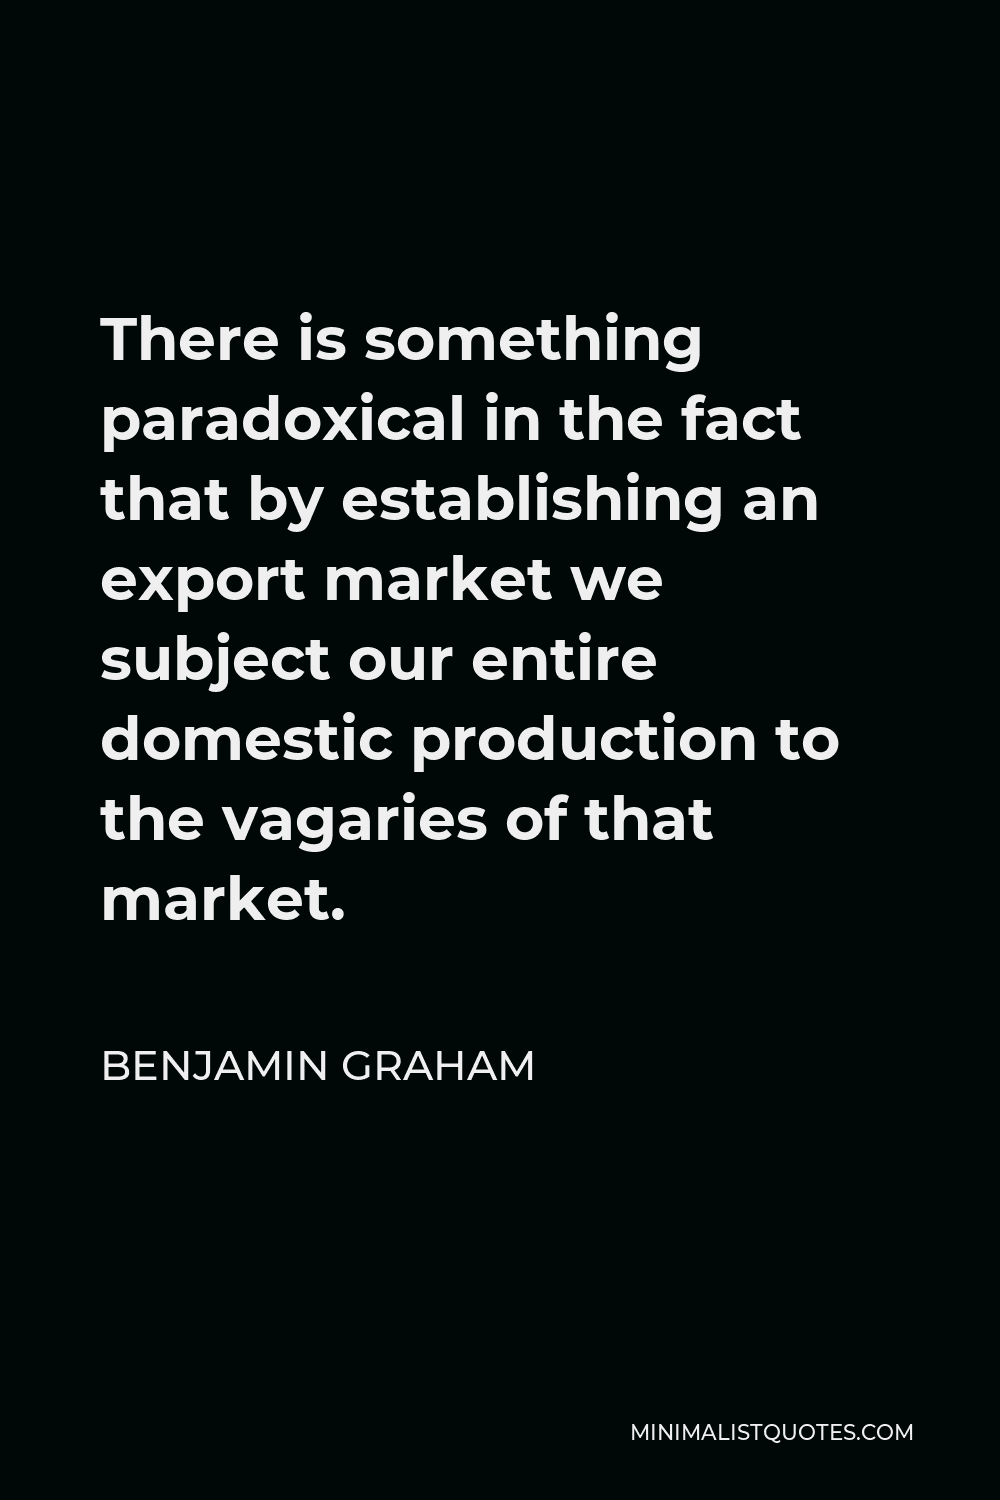 Benjamin Graham Quote - There is something paradoxical in the fact that by establishing an export market we subject our entire domestic production to the vagaries of that market.